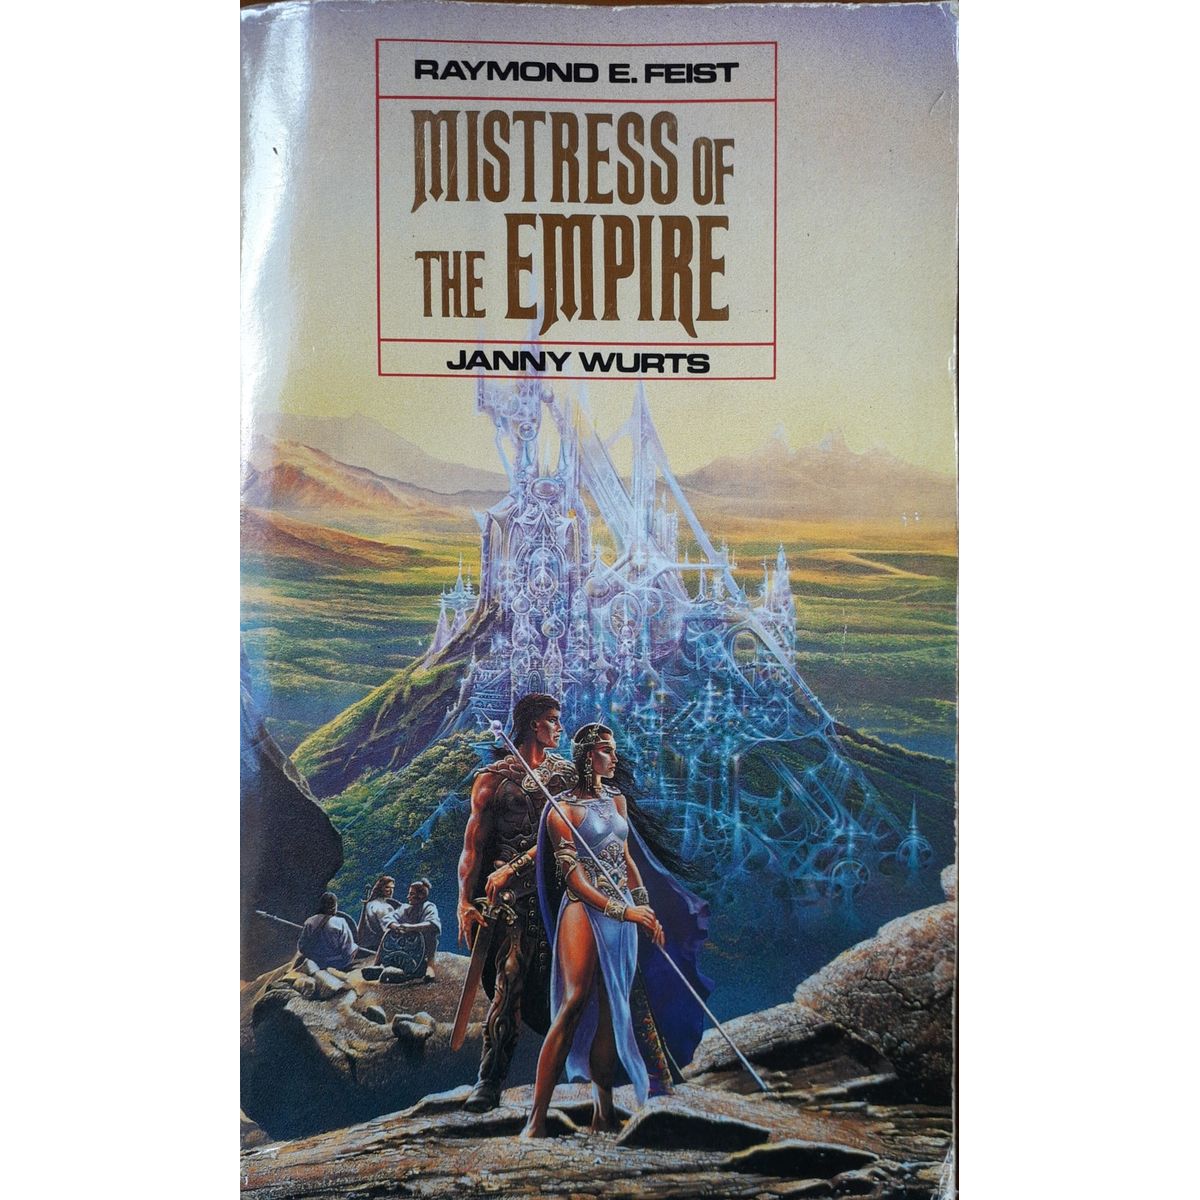 ISBN: 9780586203798 / 0586203796 - Mistress of the Empire by Raymond E. Feist and Janny Wurts [1992]